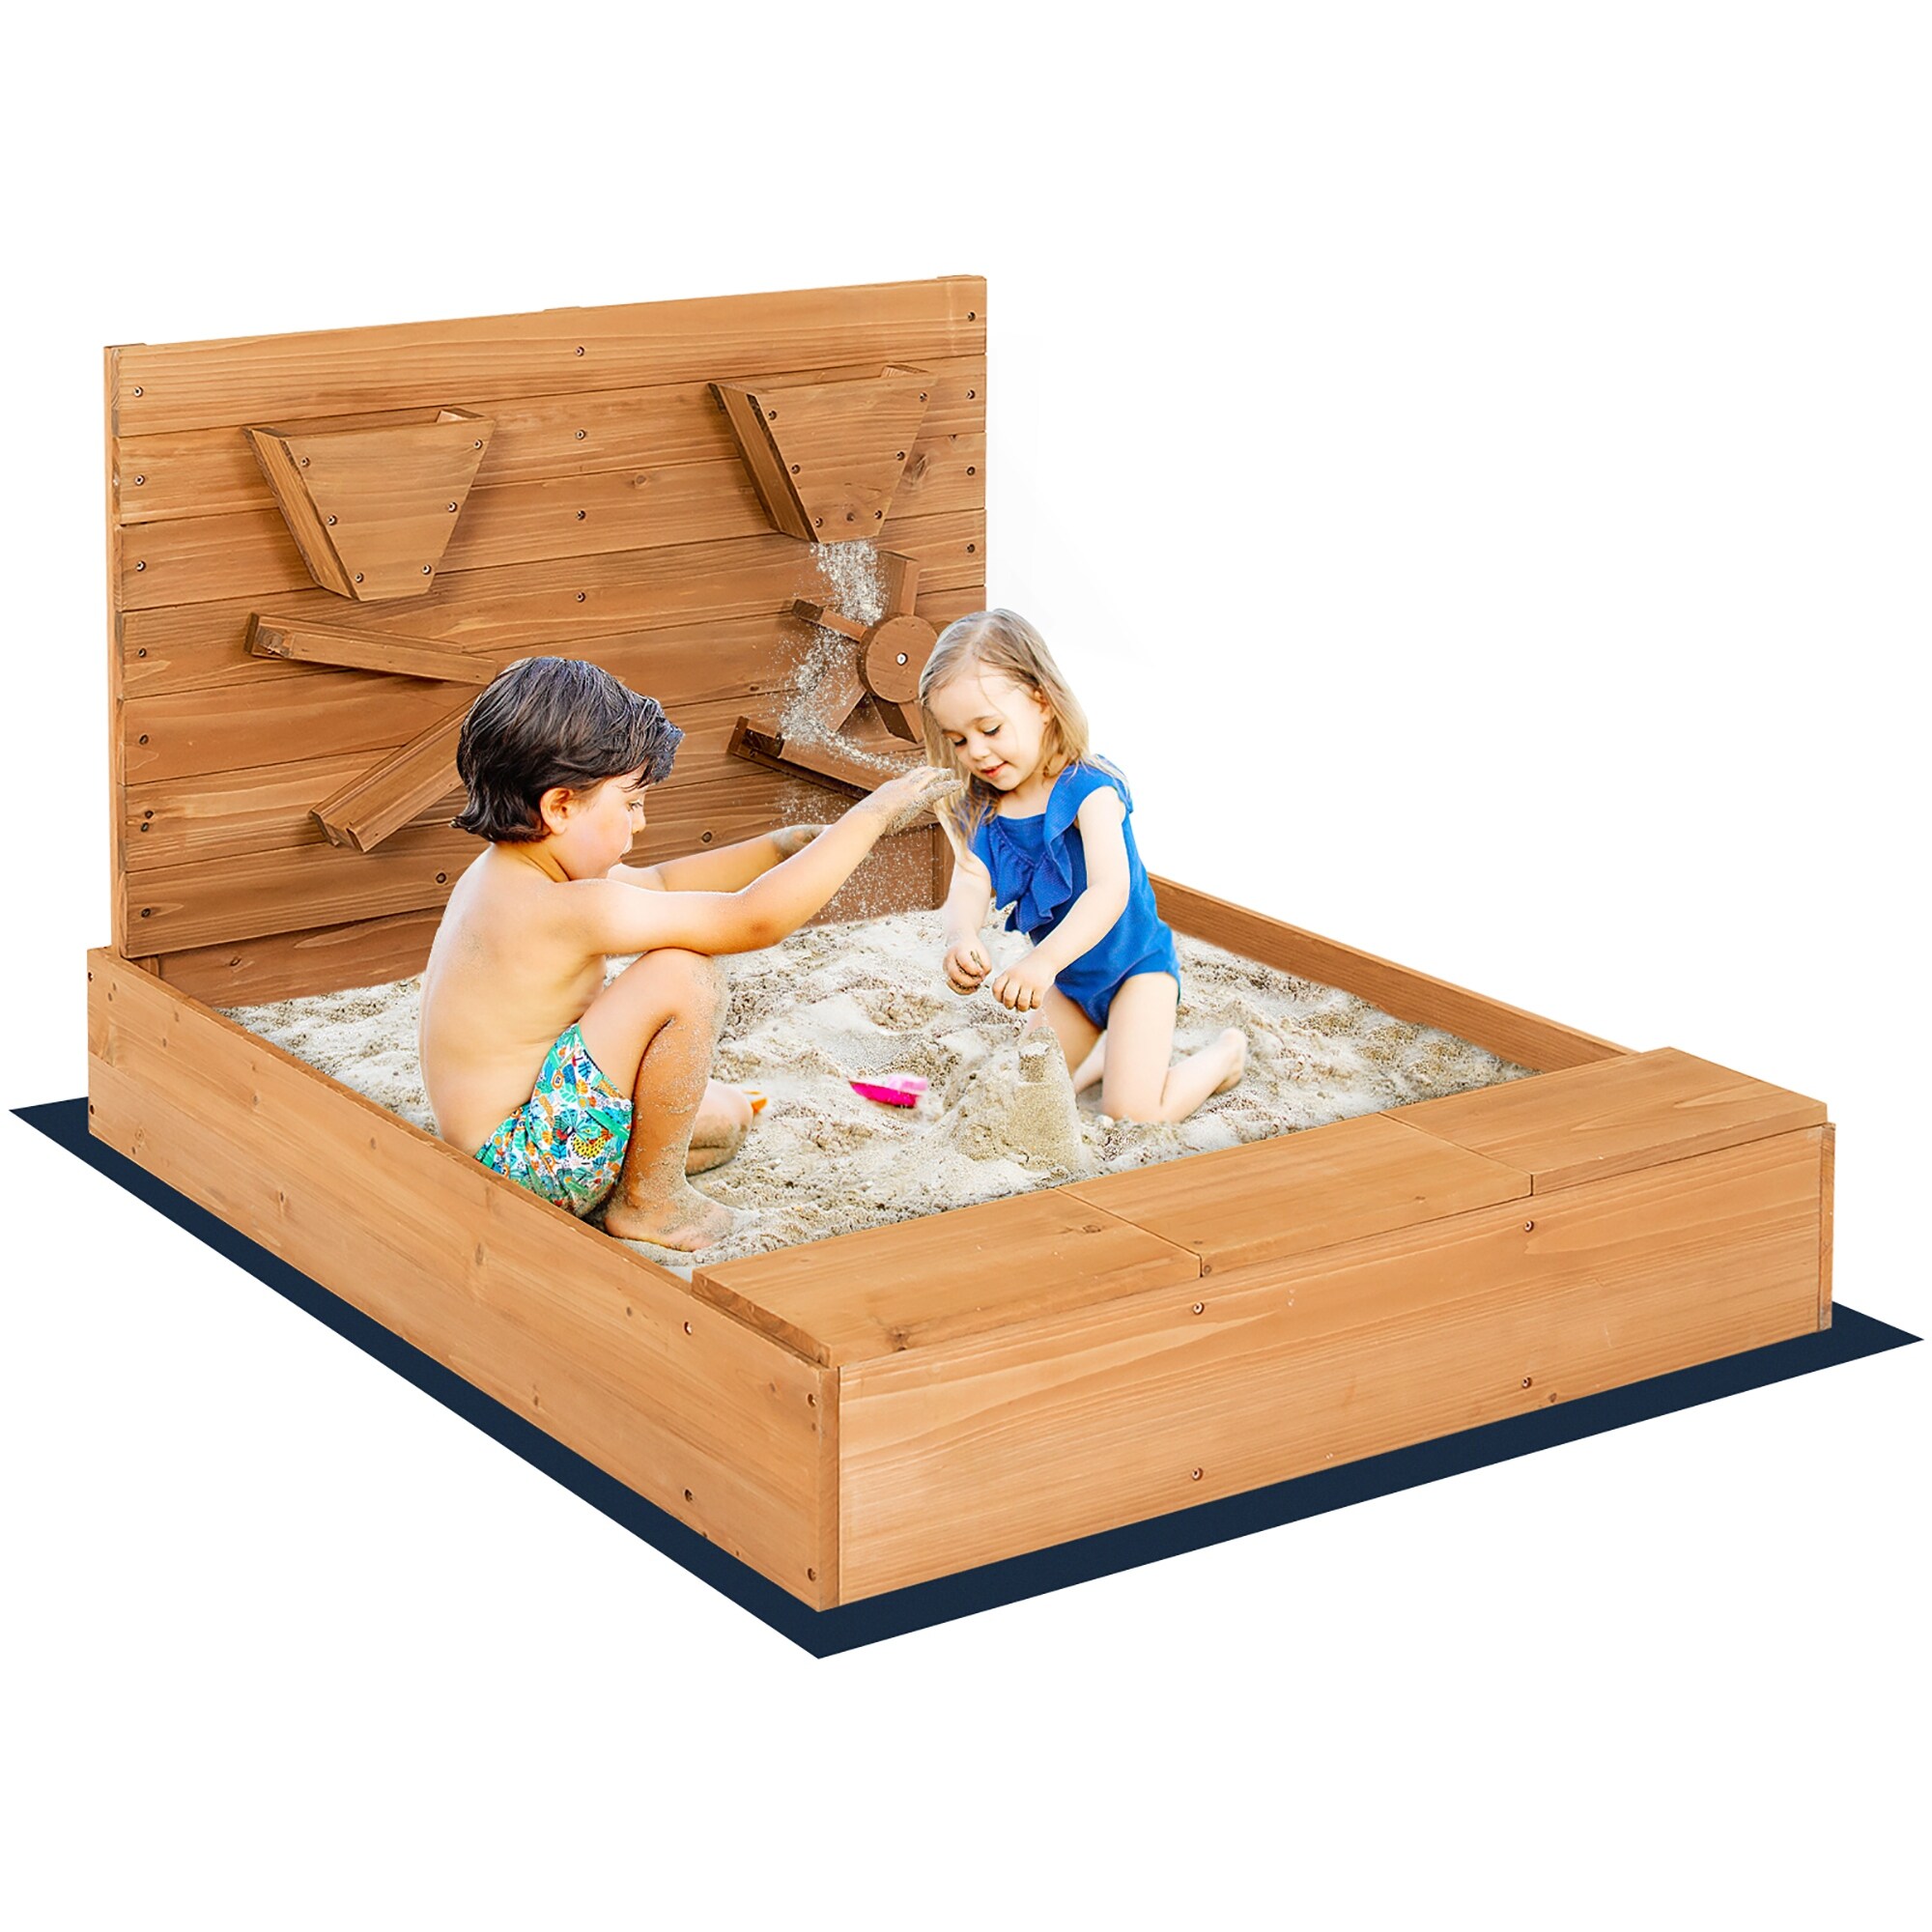 Costway Wooden Sandbox w/ Sand Wall & Cover & Bottom Liner for Kids - See Details